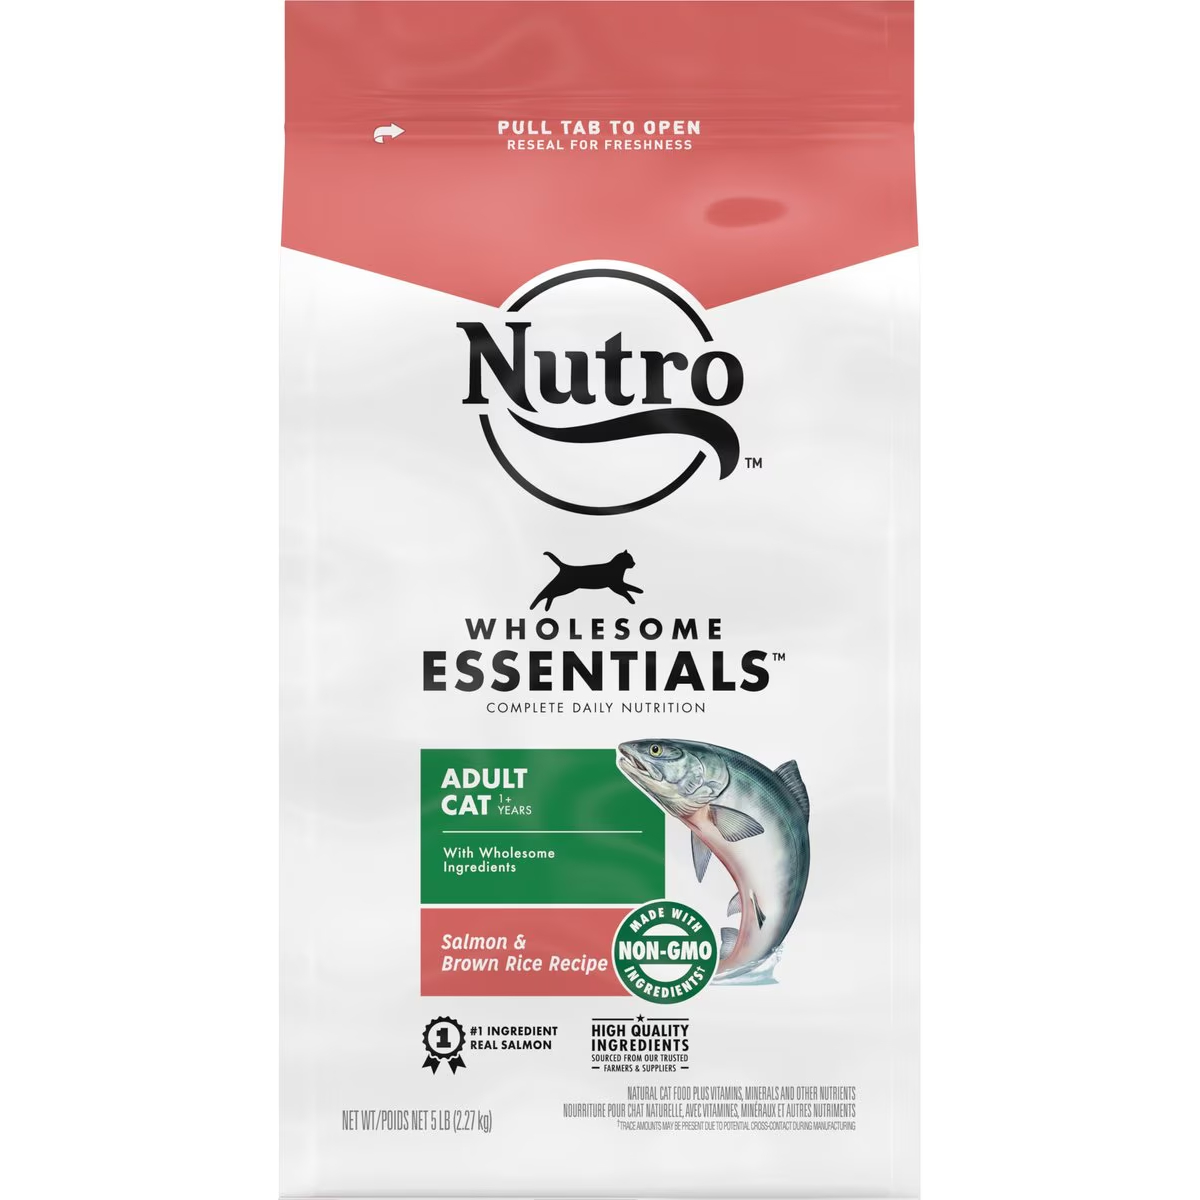 Nutro Wholesome Essentials Adult Salmon & Brown Rice Recipe Dry Cat Food new